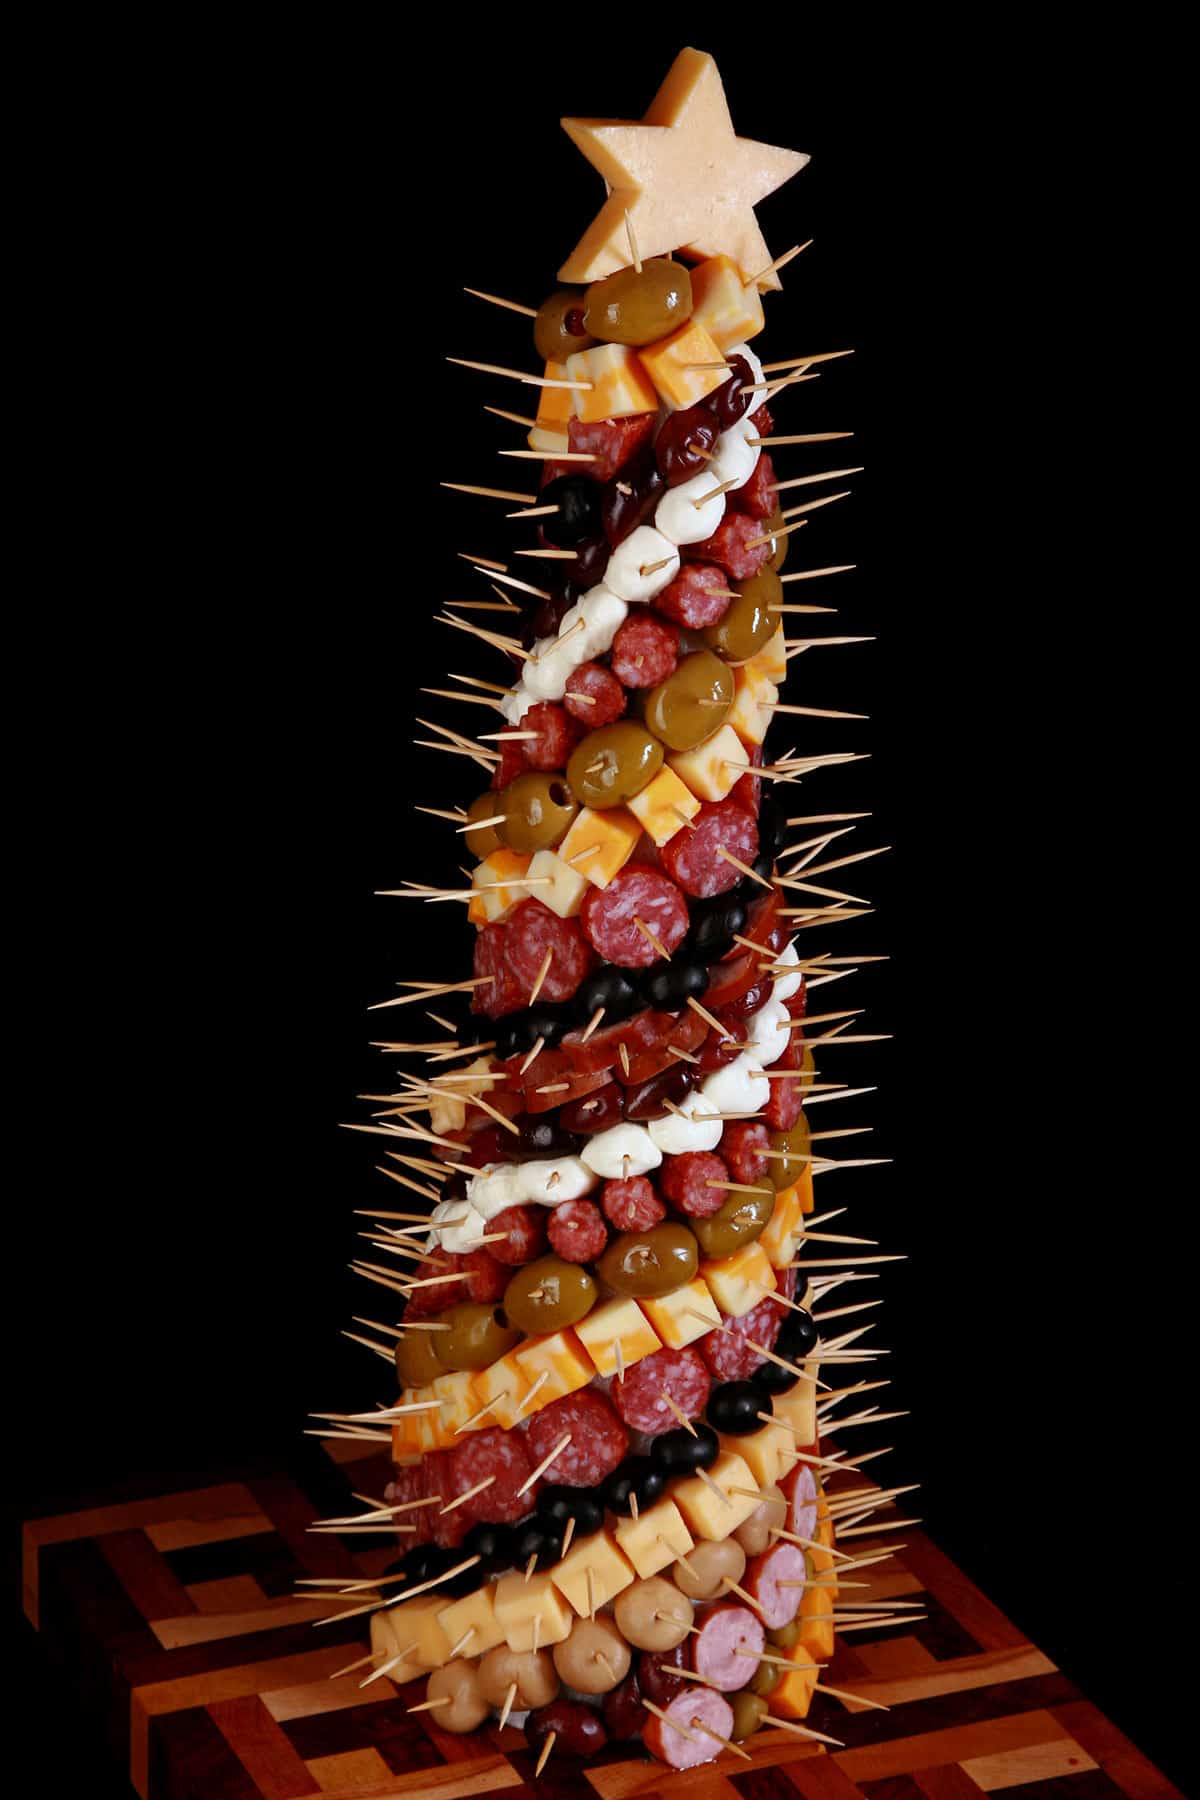 A charcuterie tree, covered in cheese, olives, and cured meats.